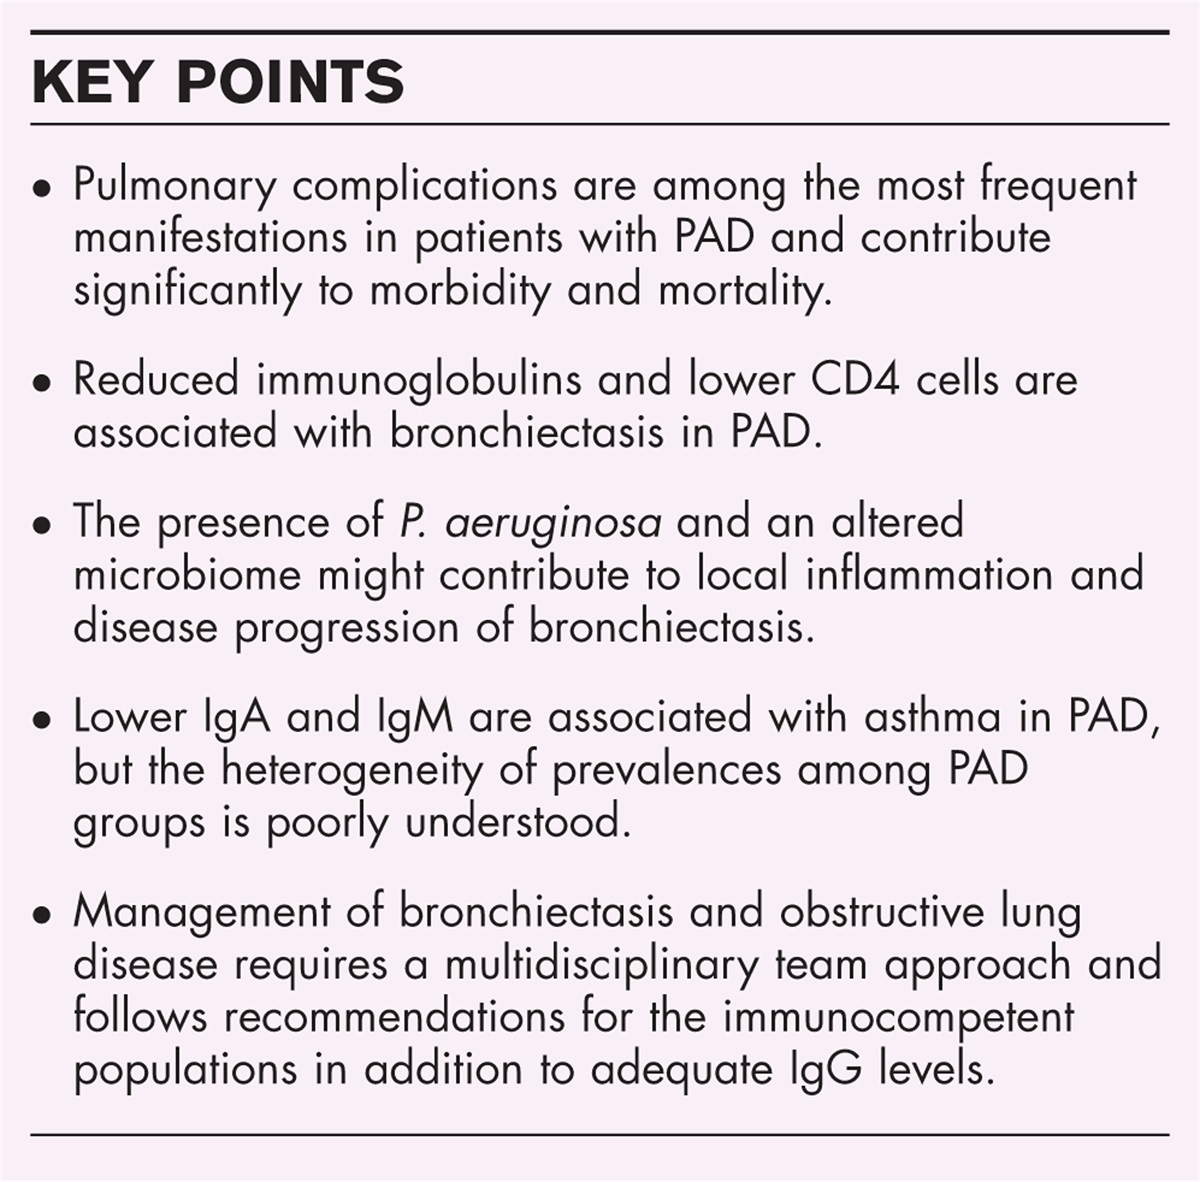 Bronchiectasis and obstructive lung diseases in primary antibody deficiencies and beyond: update on management and pathomechanisms